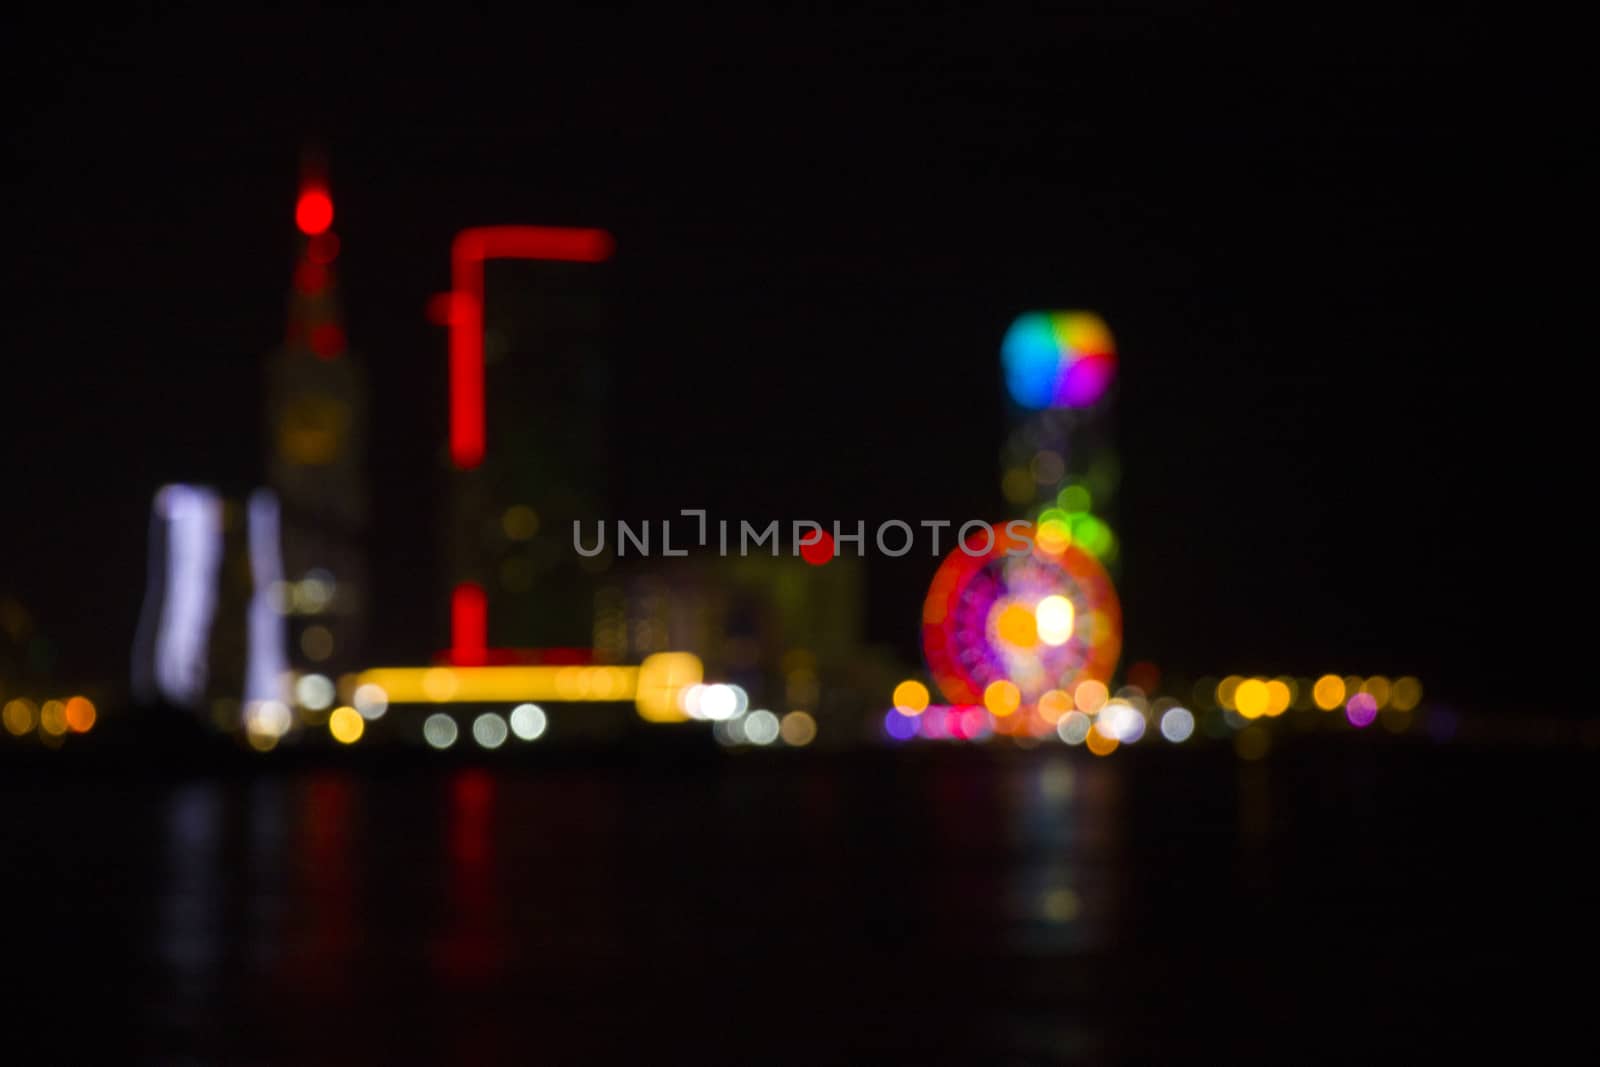 Batumi at night city view, unfocused and blur photo of skyscrapers and towers. City view at night. Most amazing view of the city in Georgia.